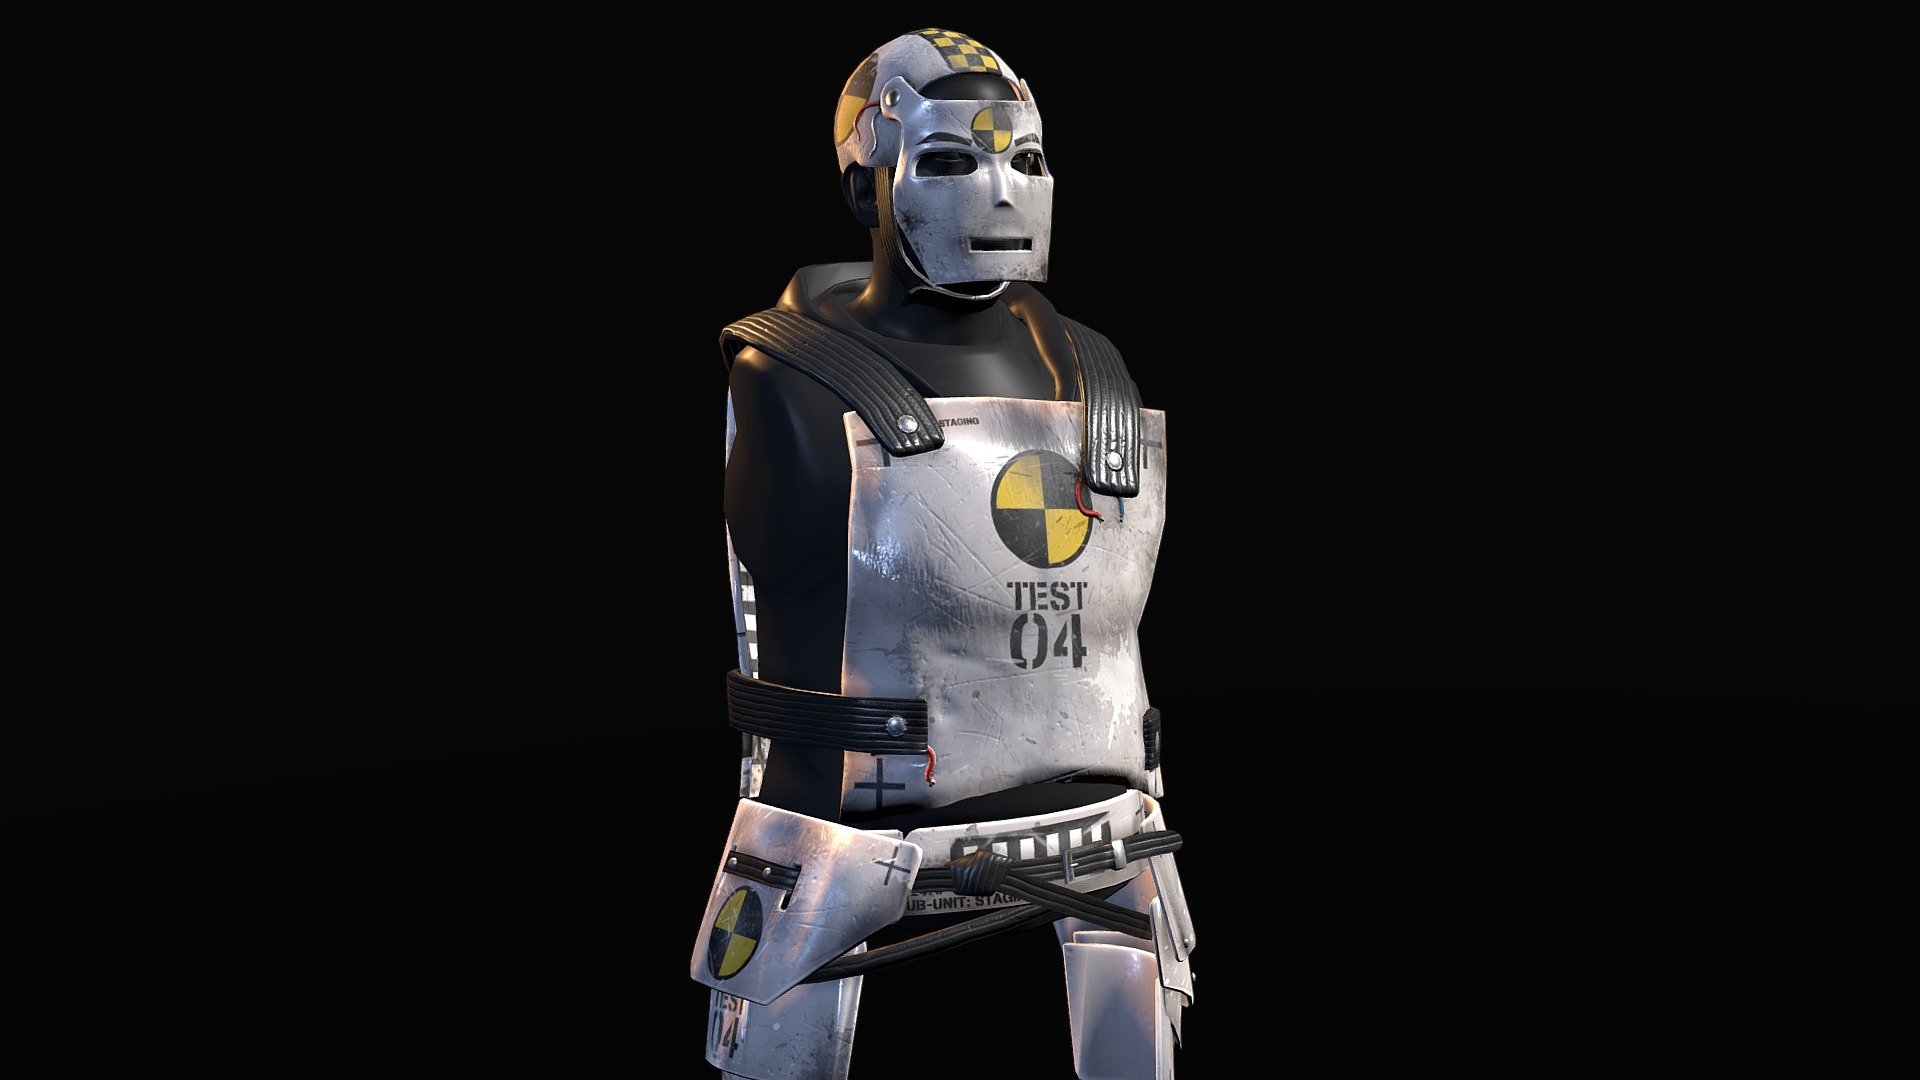 Skins for the metal facemask, chestplate, and roadsign kilt in Rust, made to resemble a crash test dummy 3d model